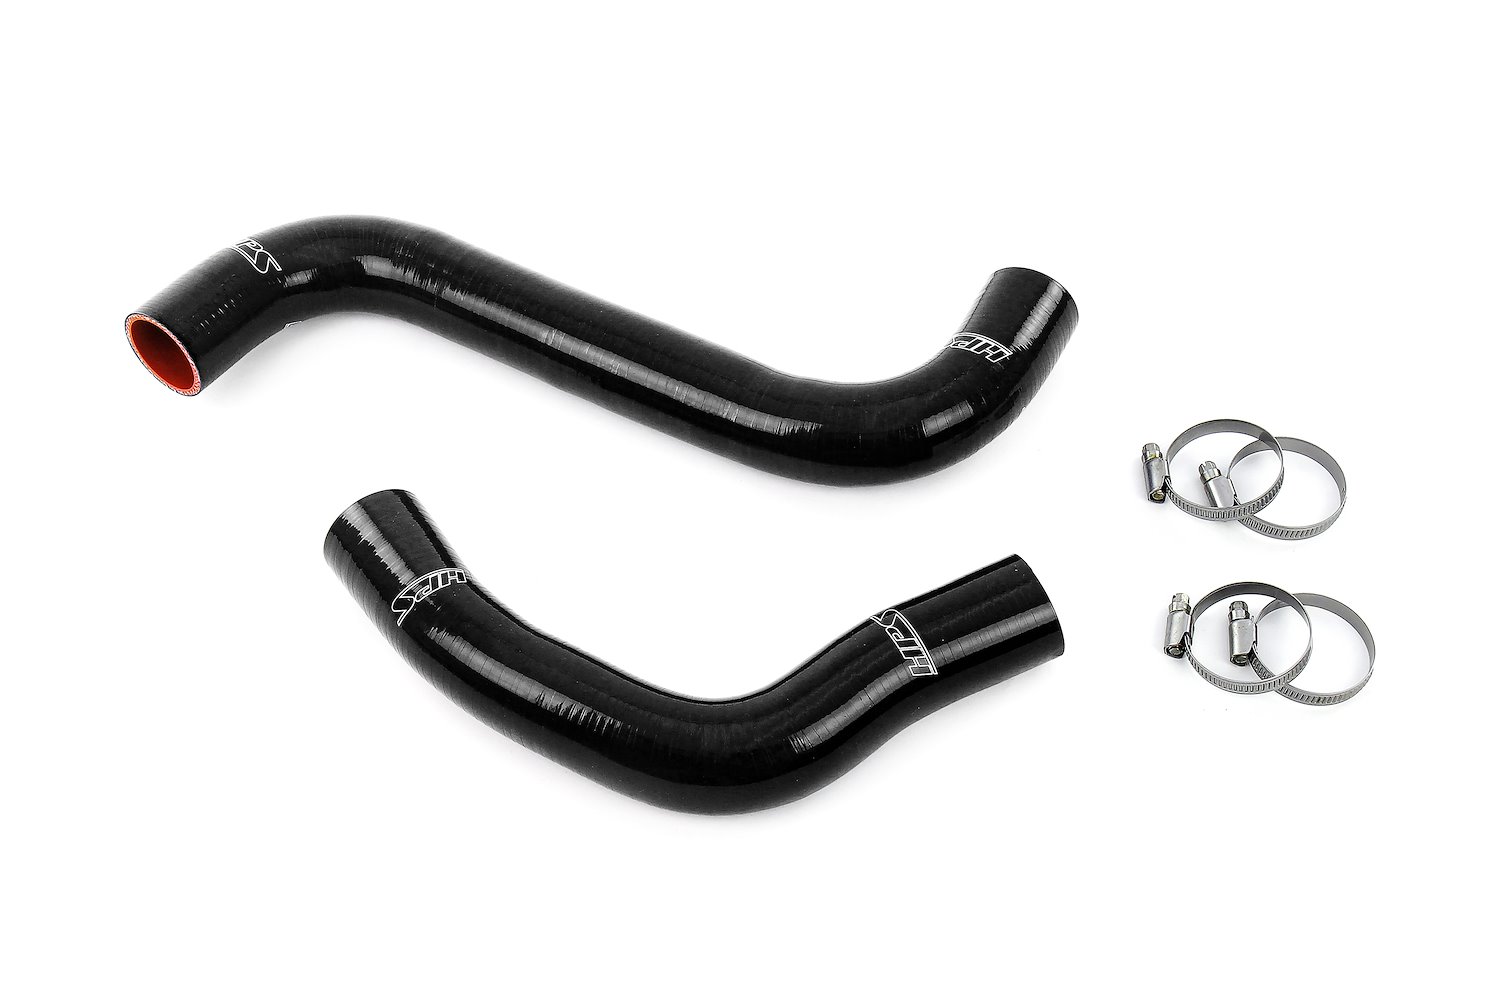 57-2107-BLK Radiator Hose Kit, 3-Ply Reinforced Silicone, Replaces Rubber Radiator Coolant Hoses